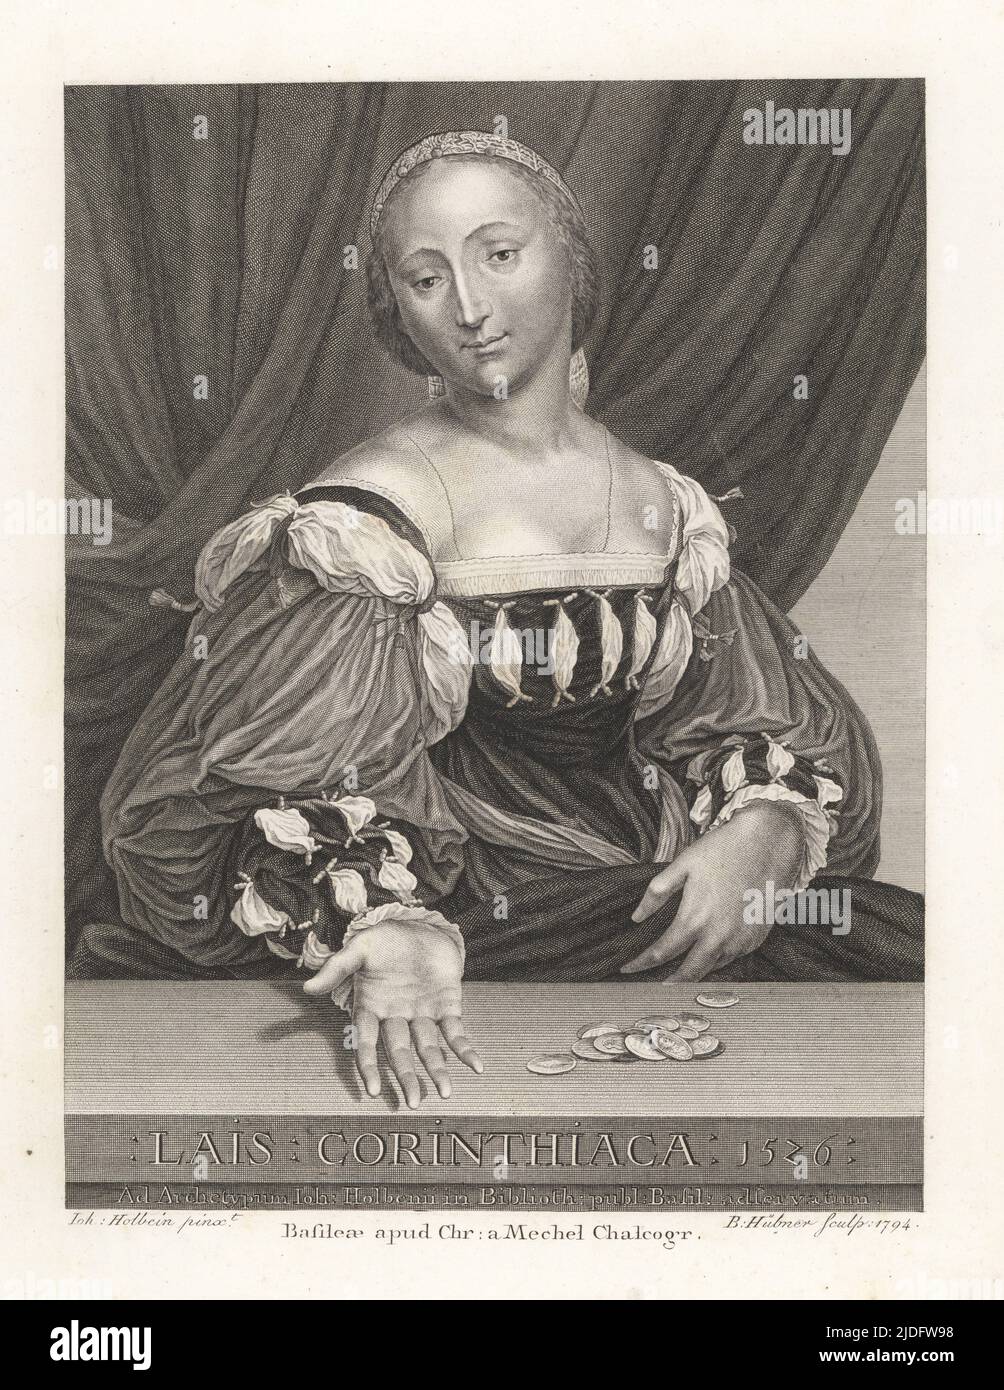 Portrait of Magdalena Offenburg as Lais of Corinth, Greek courtesan, in gown with slashed bodice and sleeves, seated at a table with coins. Titled: Lais Corinthiaca 1526. Copperplate engraving by Bartholomaus Hubner after a portrait by Hans Holbein in Christian von Mechel's Oeuvre de Jean Holbein, Chez Guillaume Haas, Basel, 1790. Stock Photo